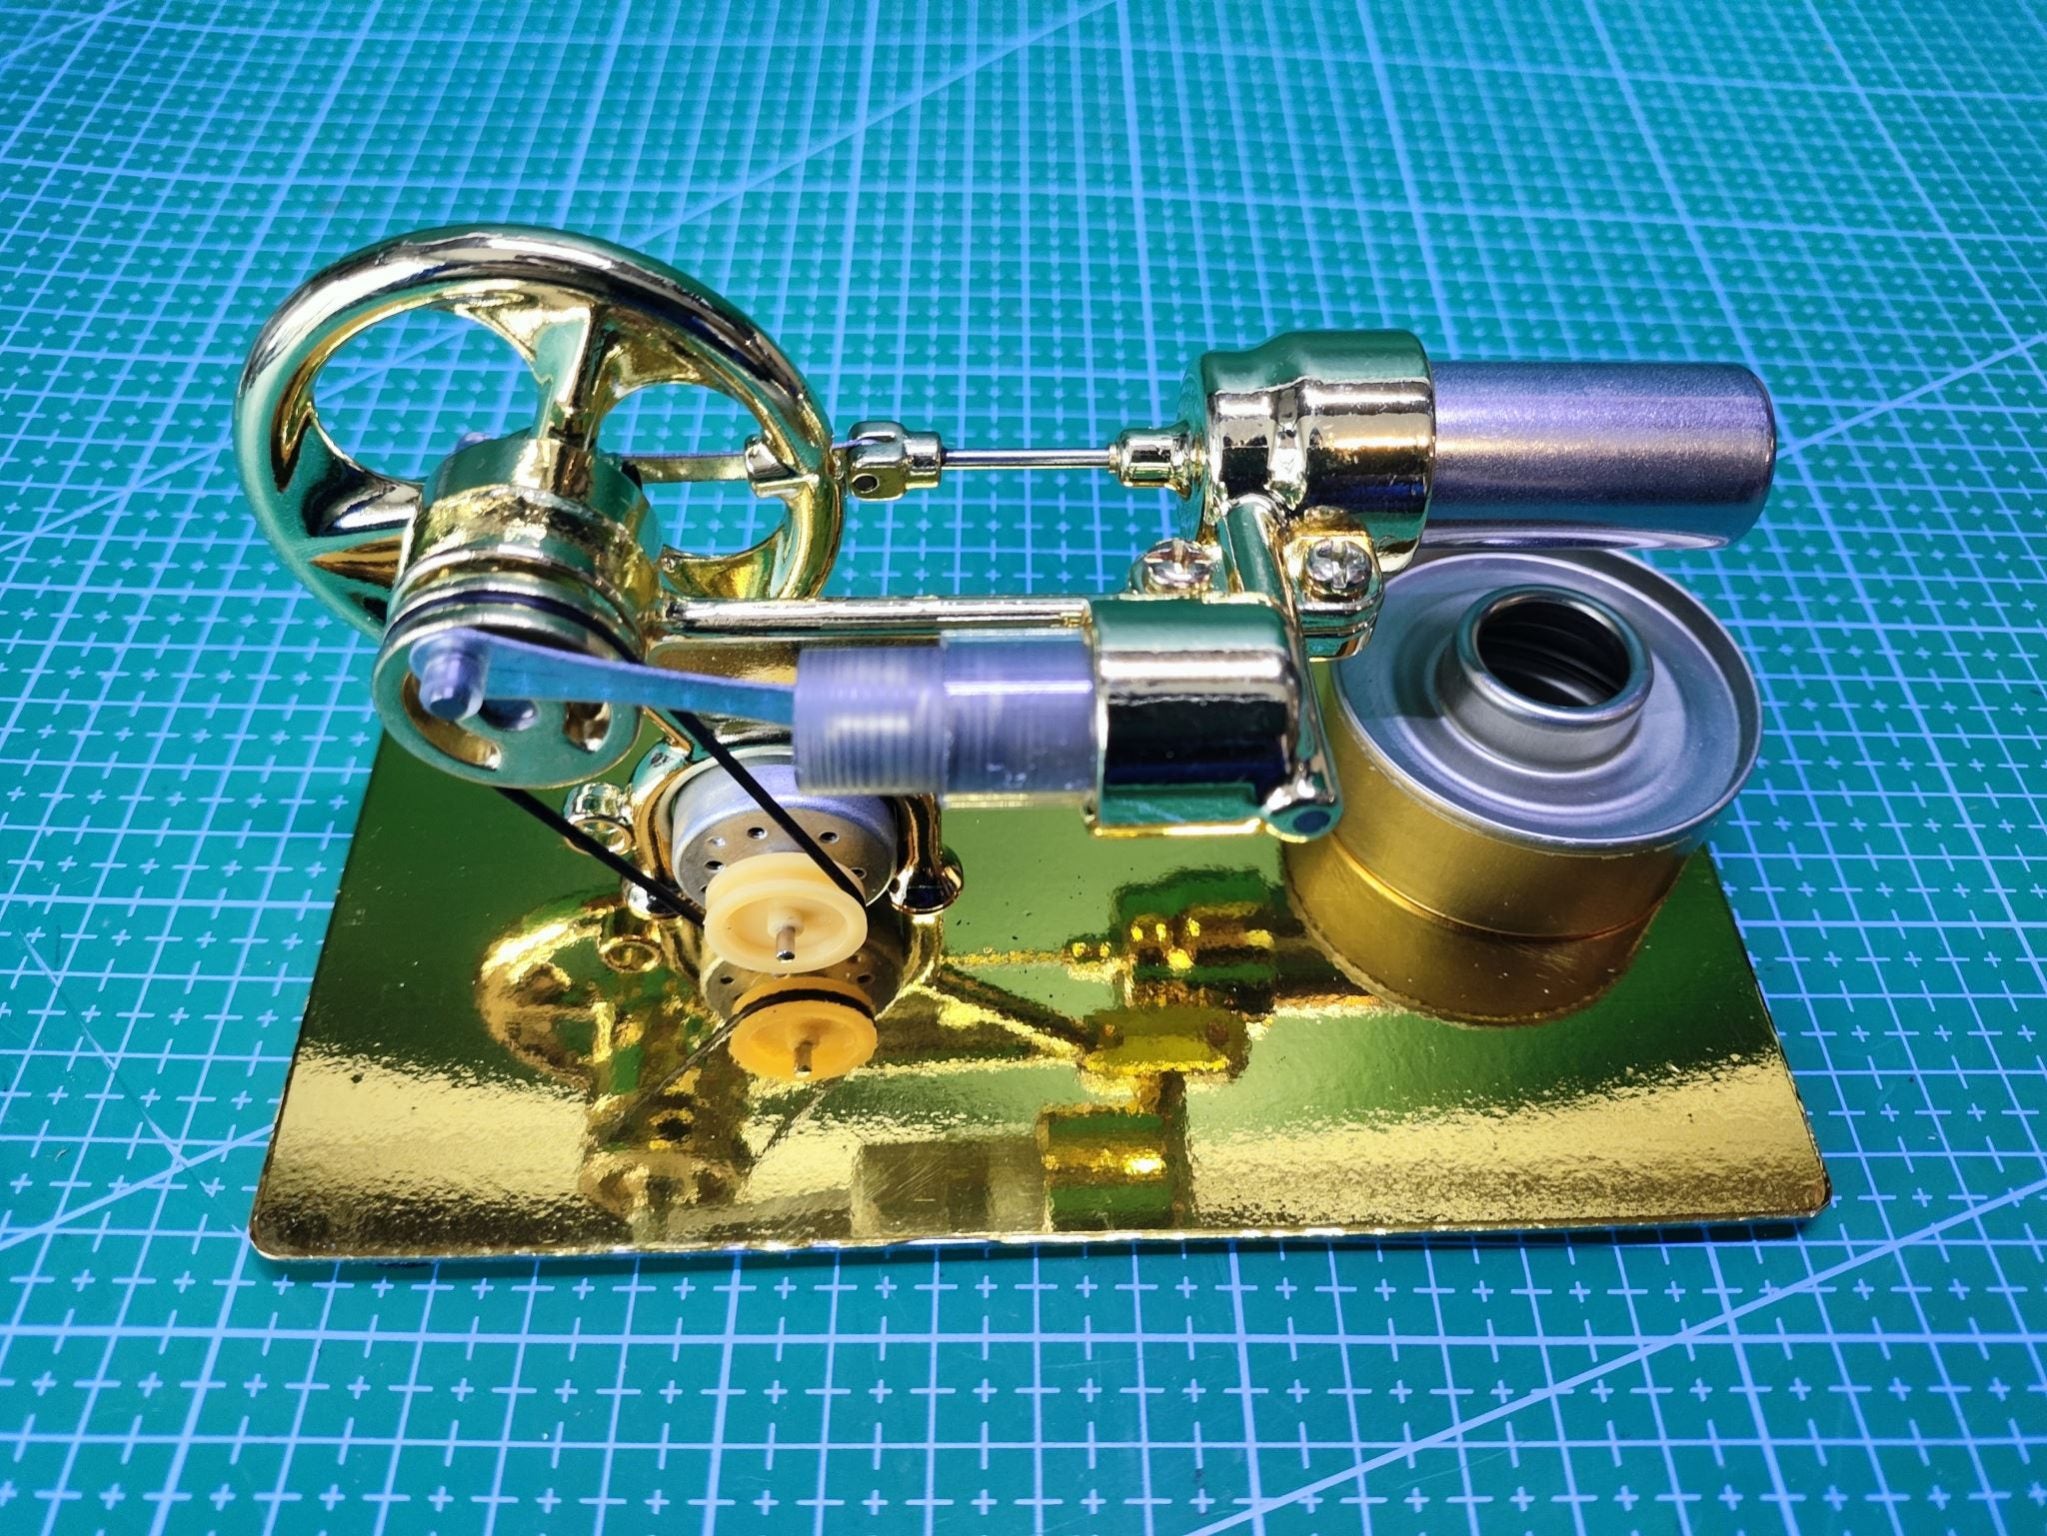 Hot Air Stirling Engine Experiment Model Physical Educational Mini Motor